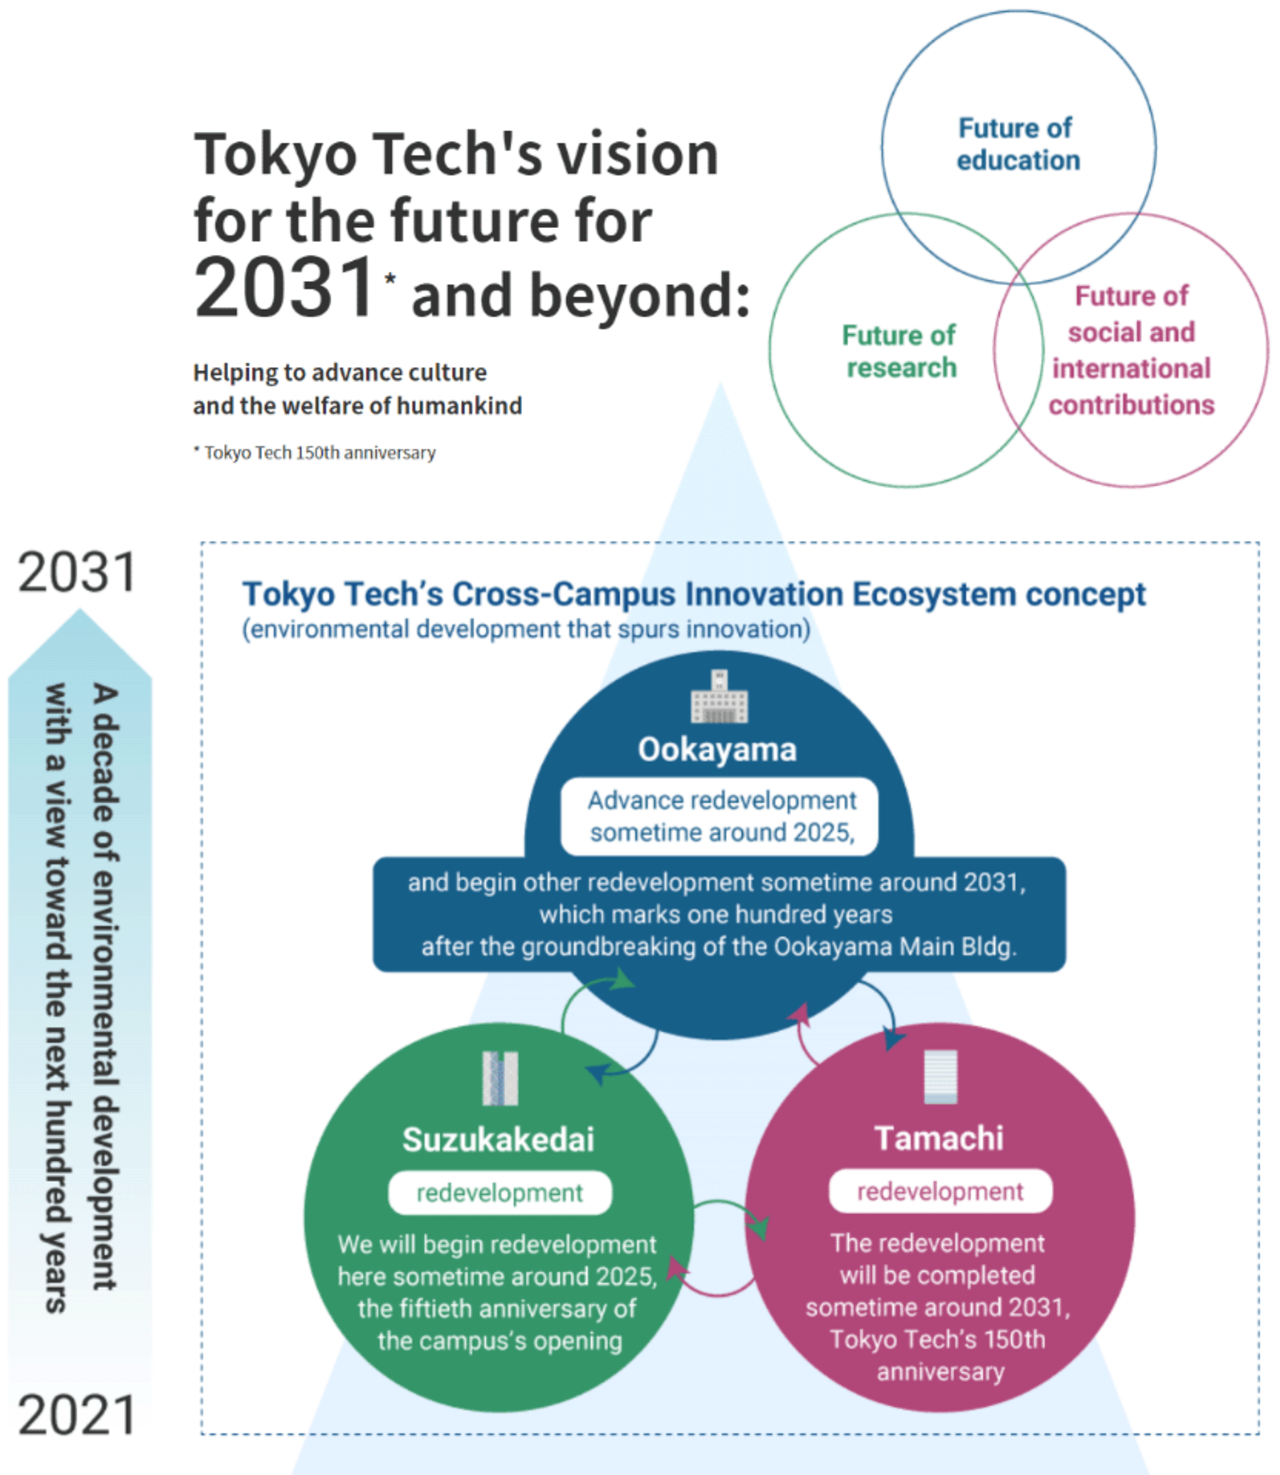 Tokyo Tech's vision for the future for 2031 and beyond: